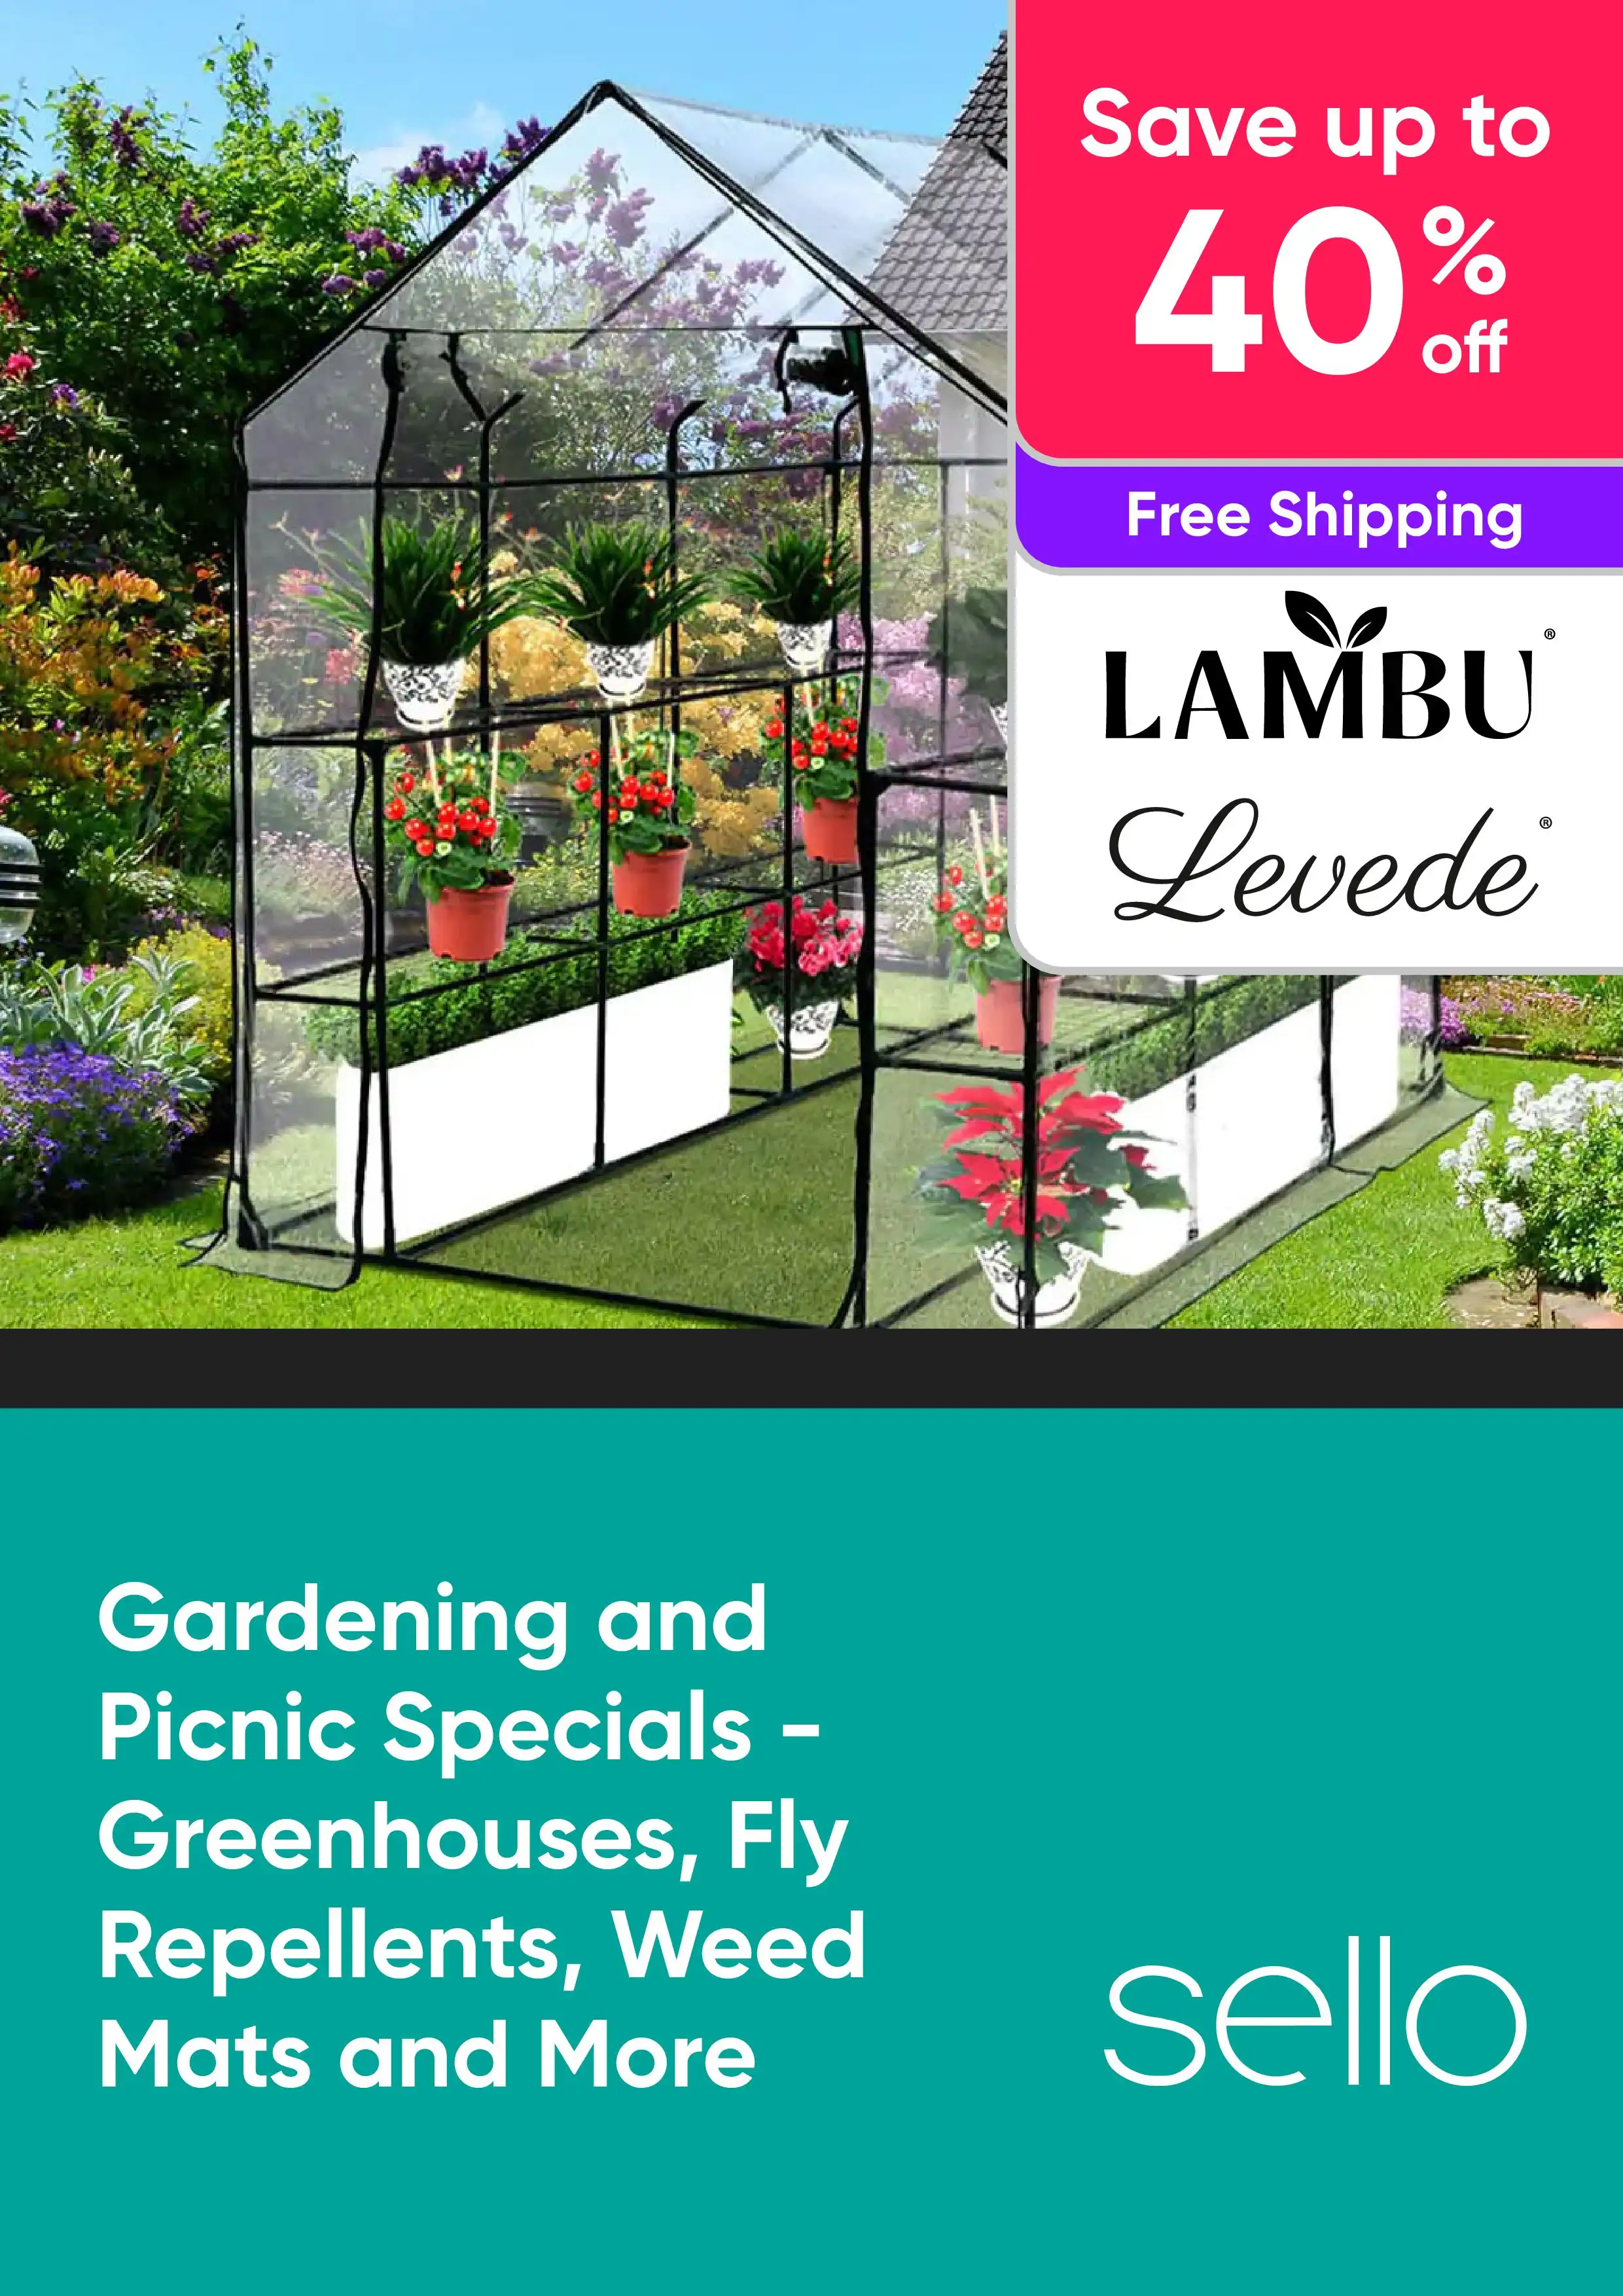 Gardening and Picnic Specials - Greenhouses, Fly Repellents, Weed Mats and More - Lambu, Levede - Up to 40% Off